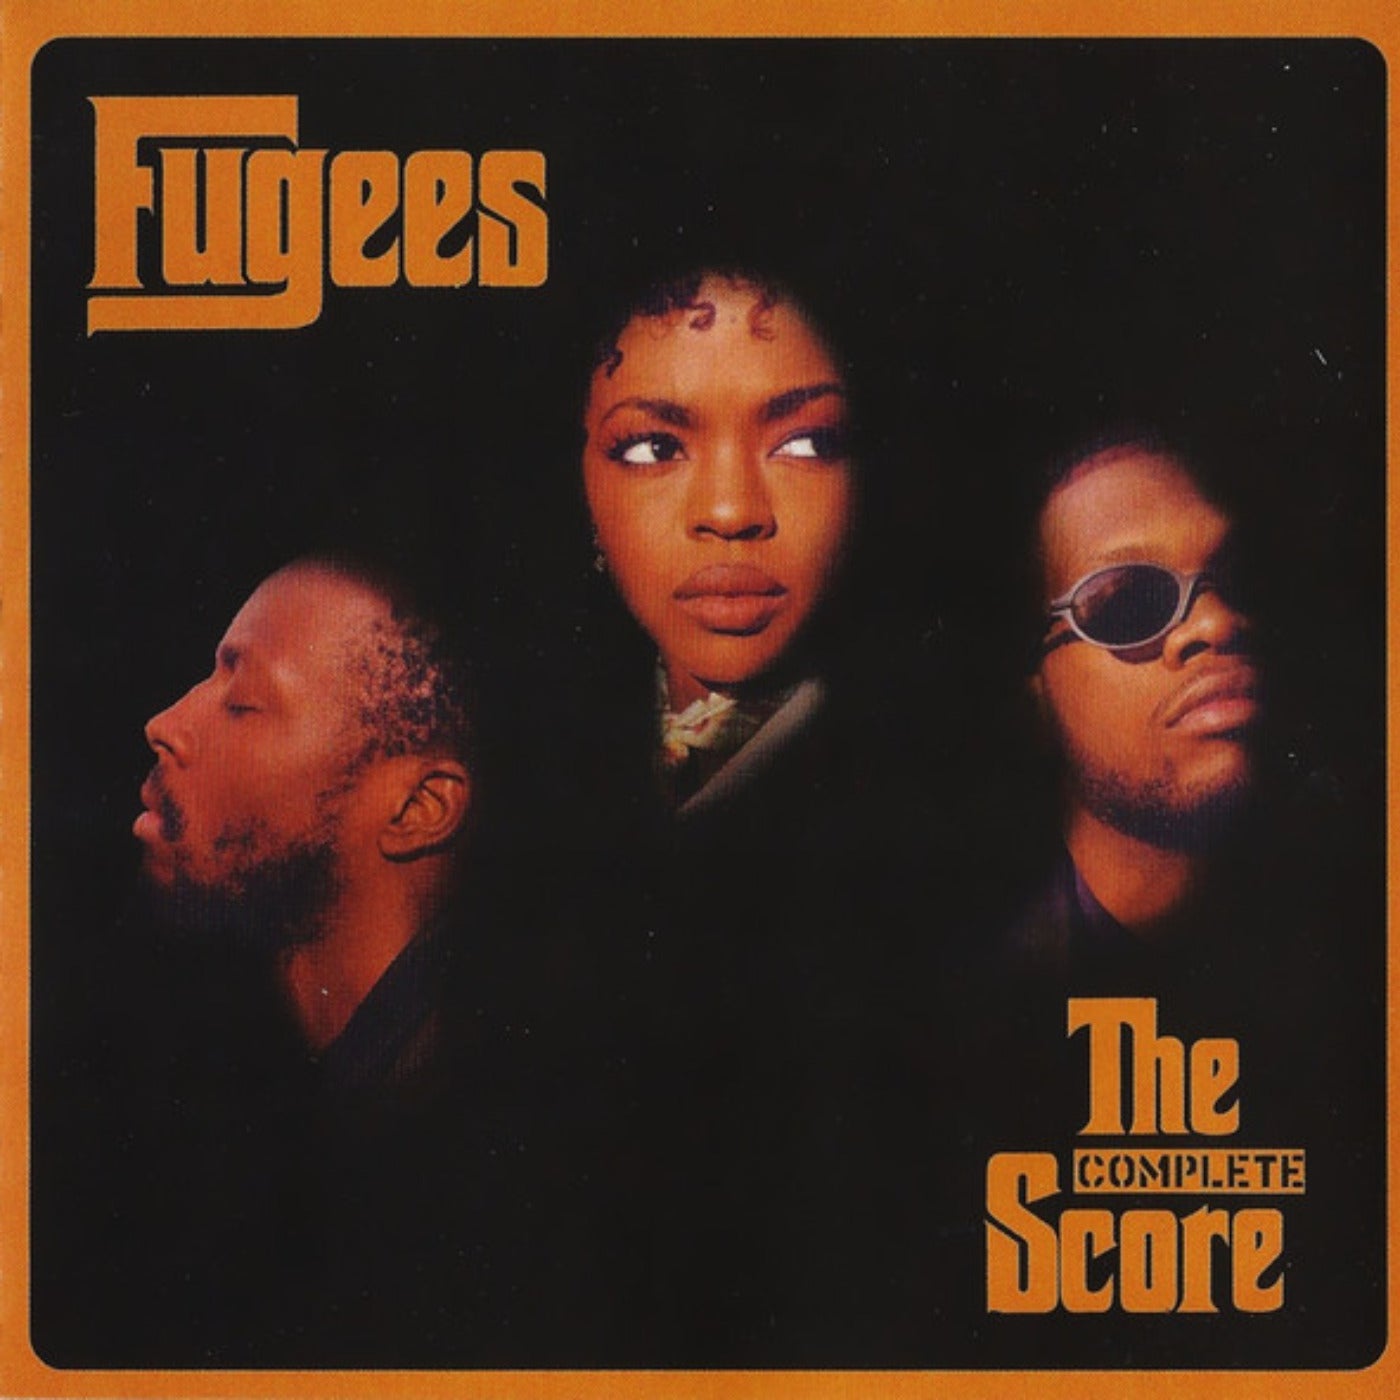 Killing Me Softly With His Song by Fugees and Ms. Lauryn Hill on 